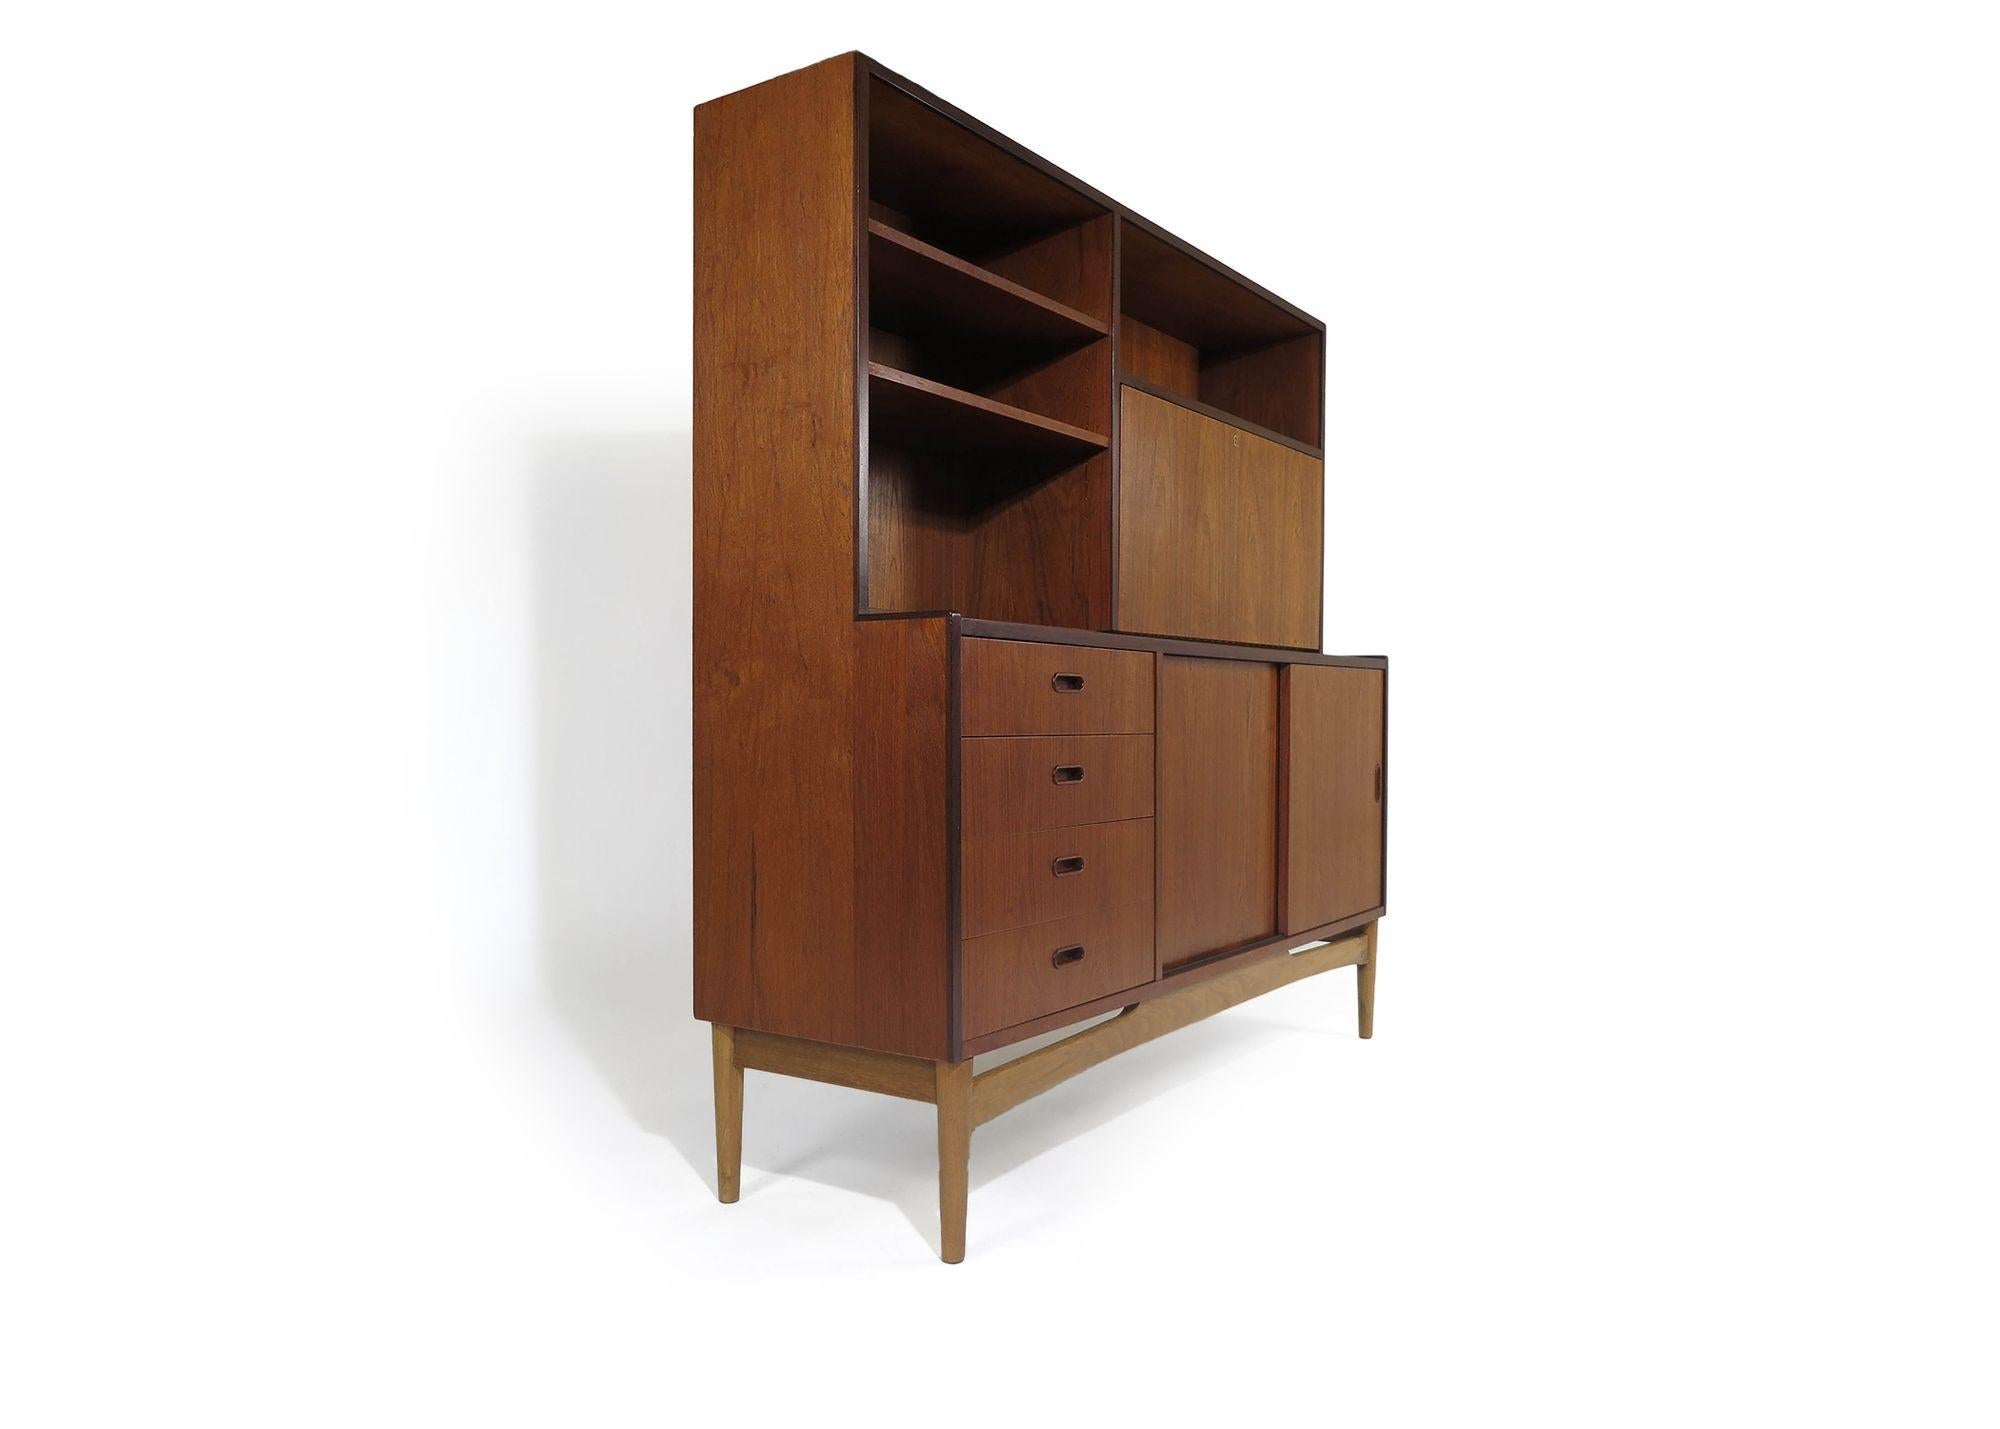 1965 Danish tall cabinet crafted of teak with sliding doors, series of four drawers, a locking drop-front desk surface, and open bookcase with adjustable shelves. The cabinet is raised on a sculptural solid oak base with tapered legs. The cabinet